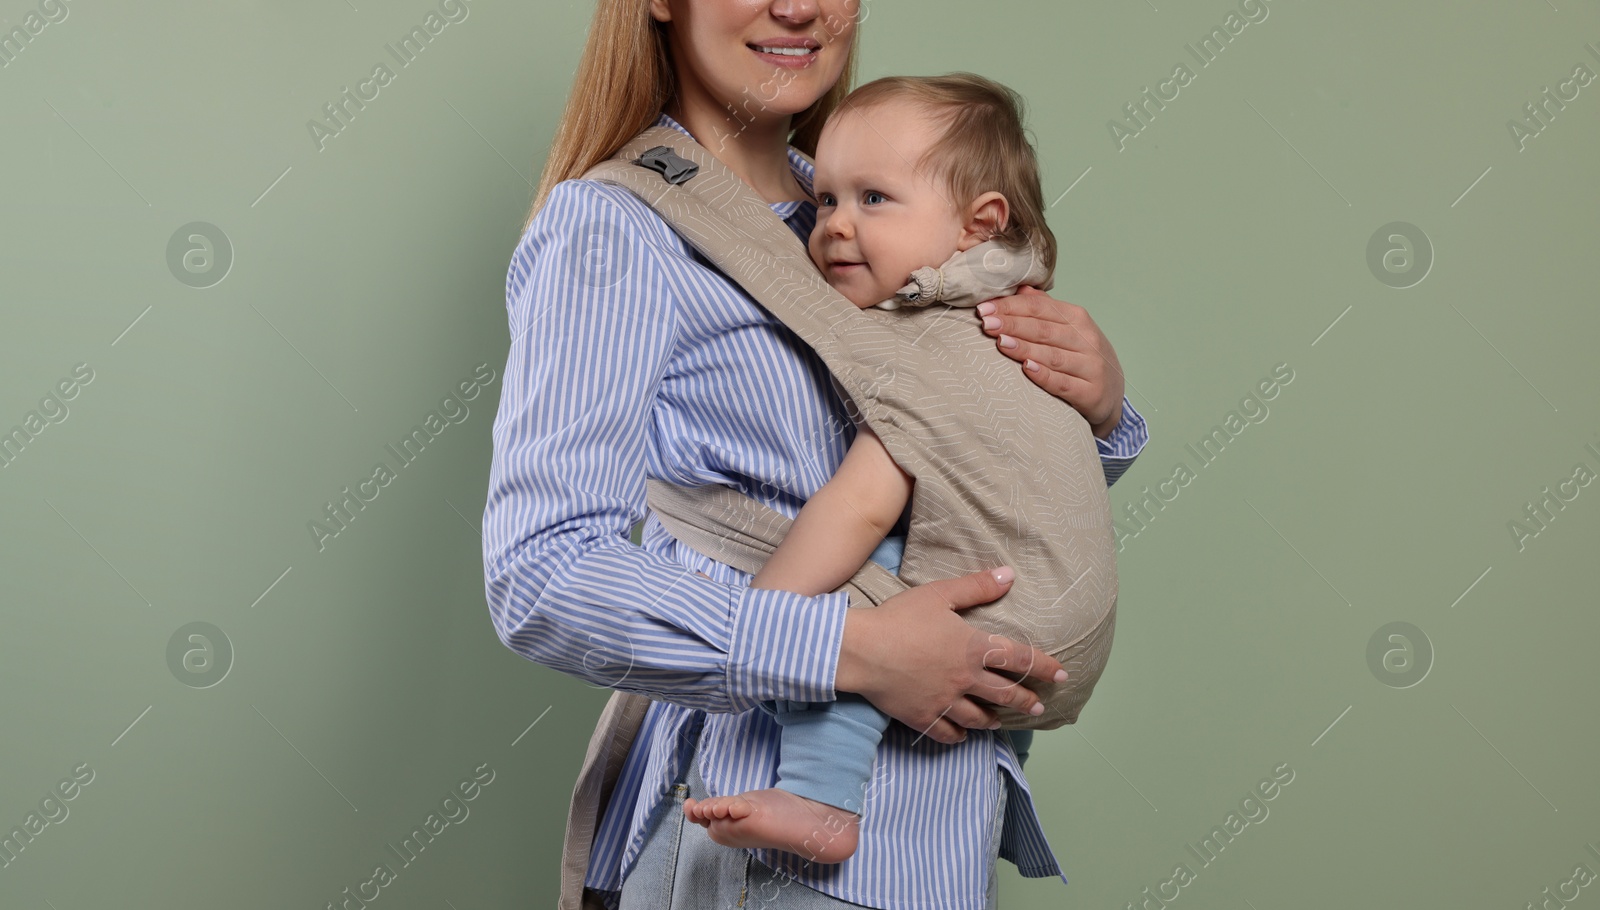 Photo of Mother holding her child in sling (baby carrier) on olive background, closeup